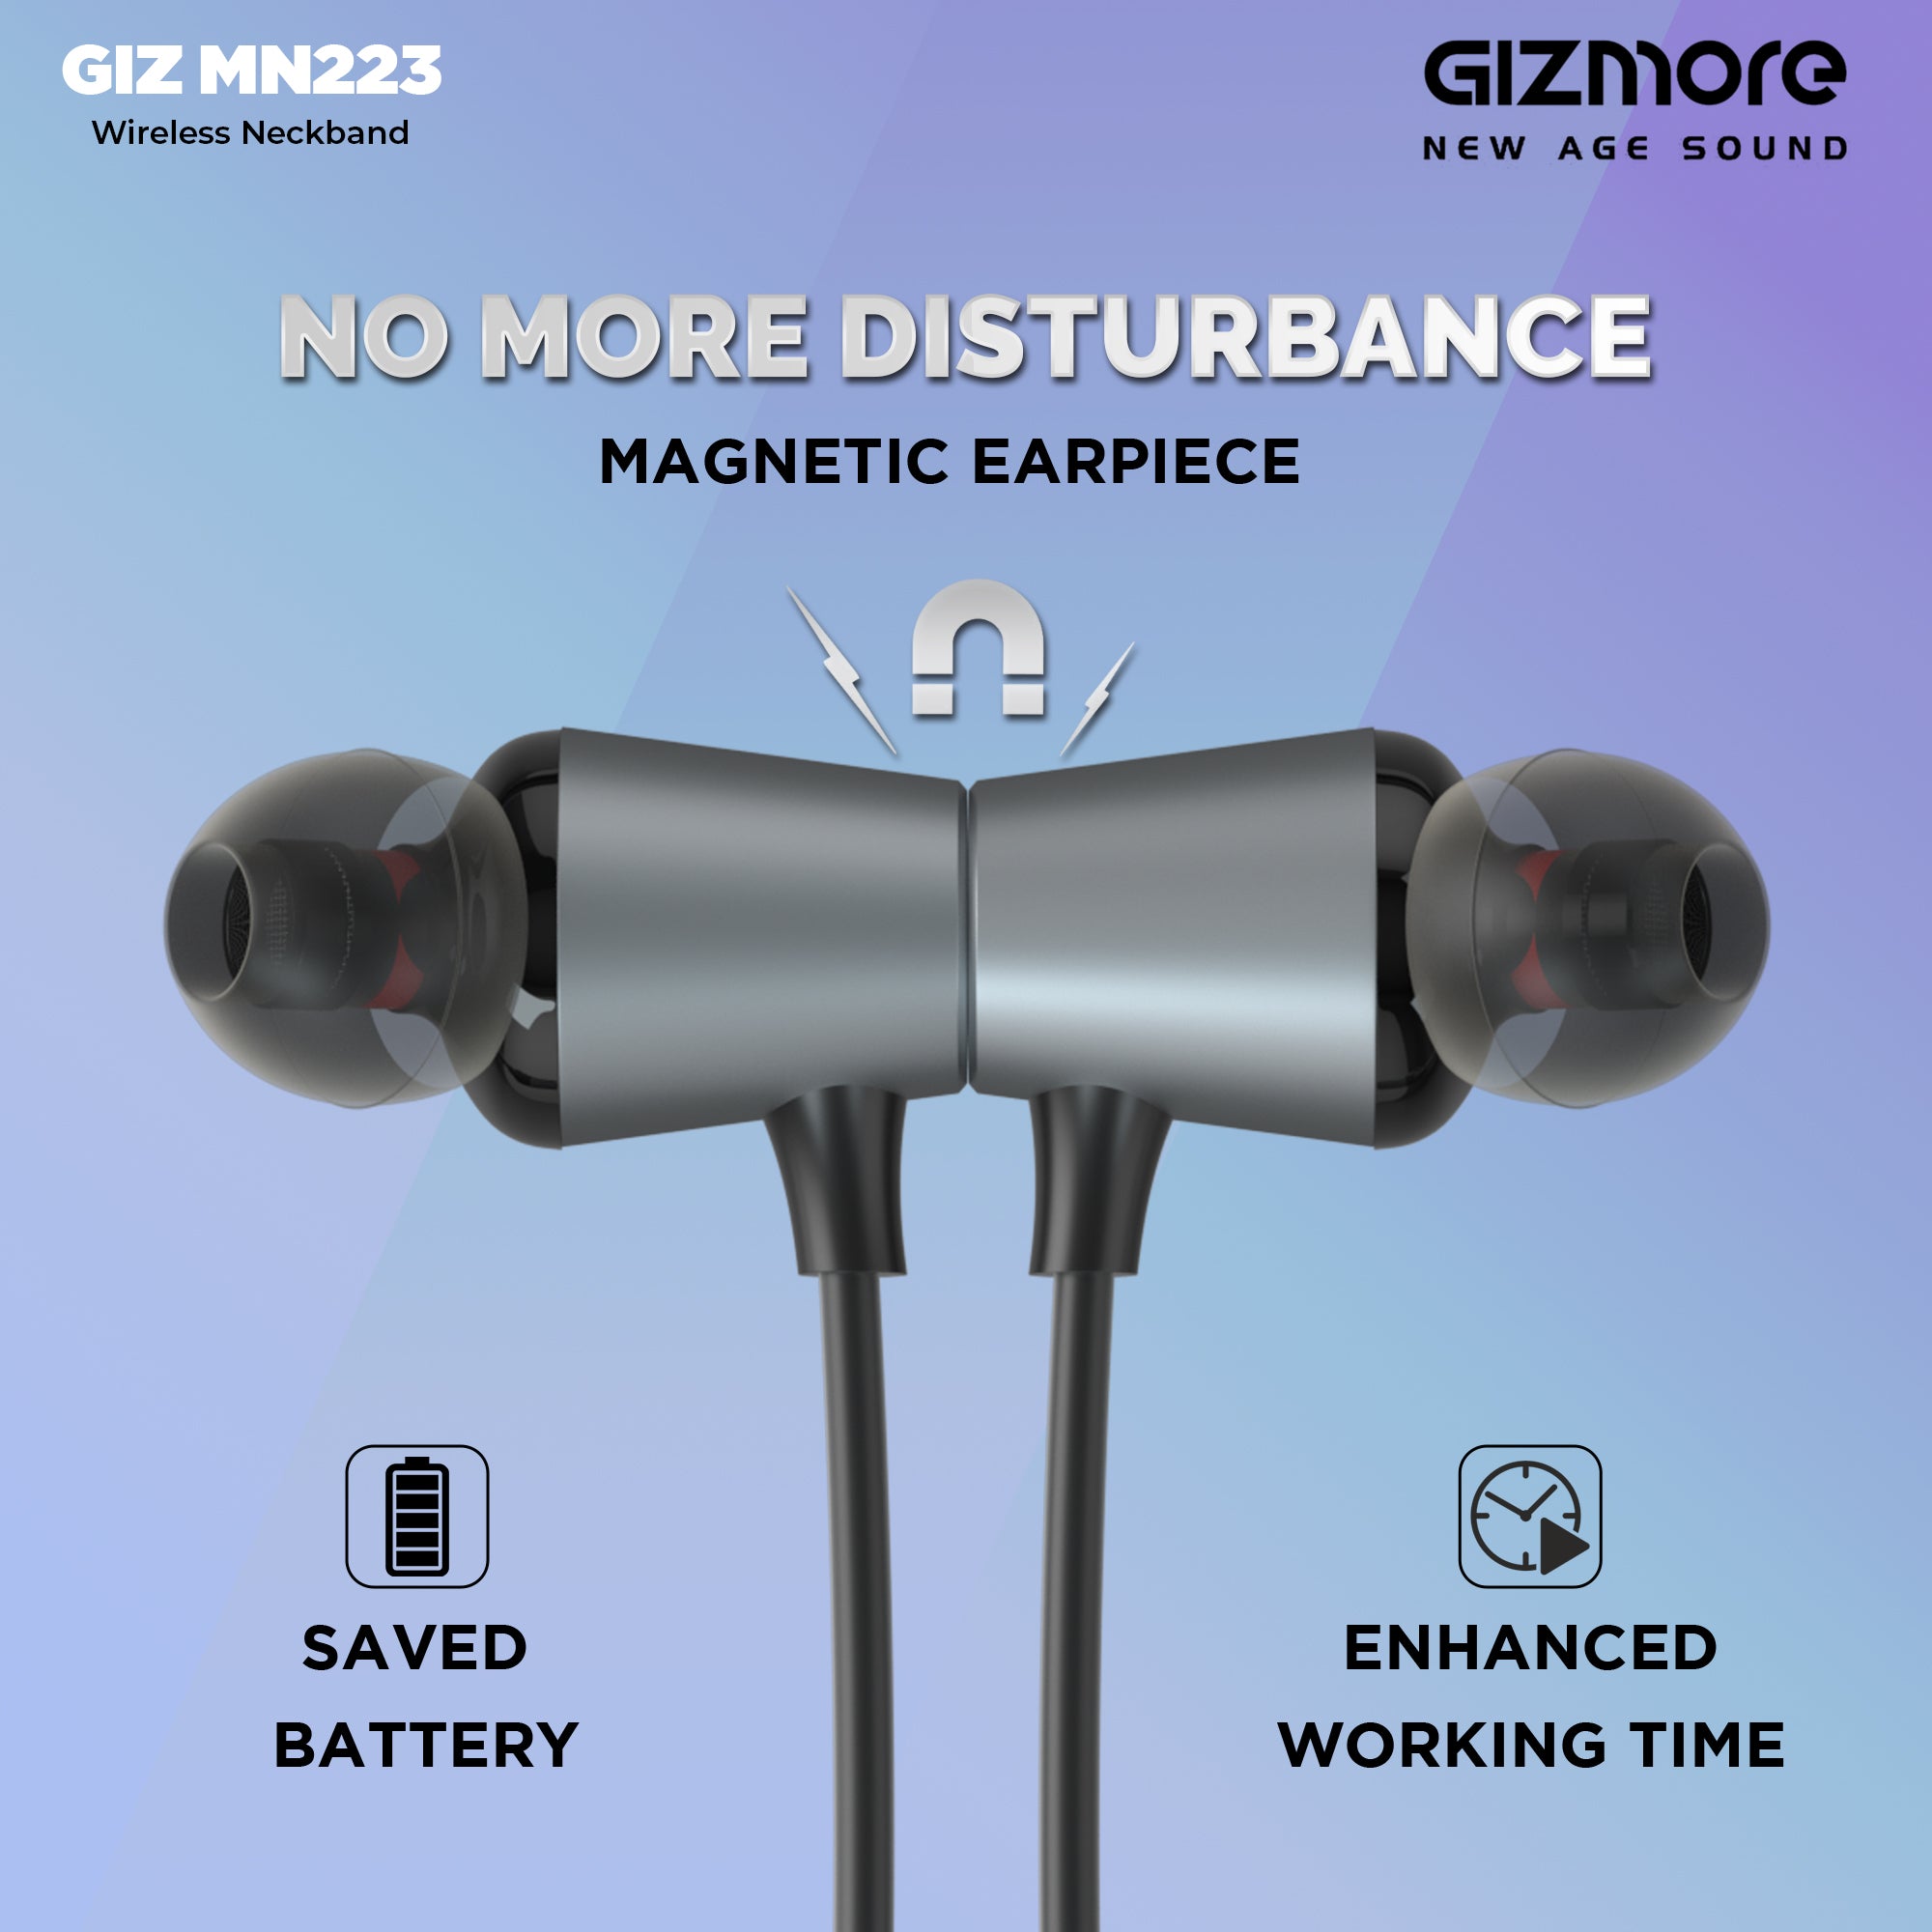 Gizmore Giz MN223 Bluetooth Wireless Neckband Magnetic Earphones with Dual Pairing Fast Charging Great Wireless Sound with 40 Hours of Playtime